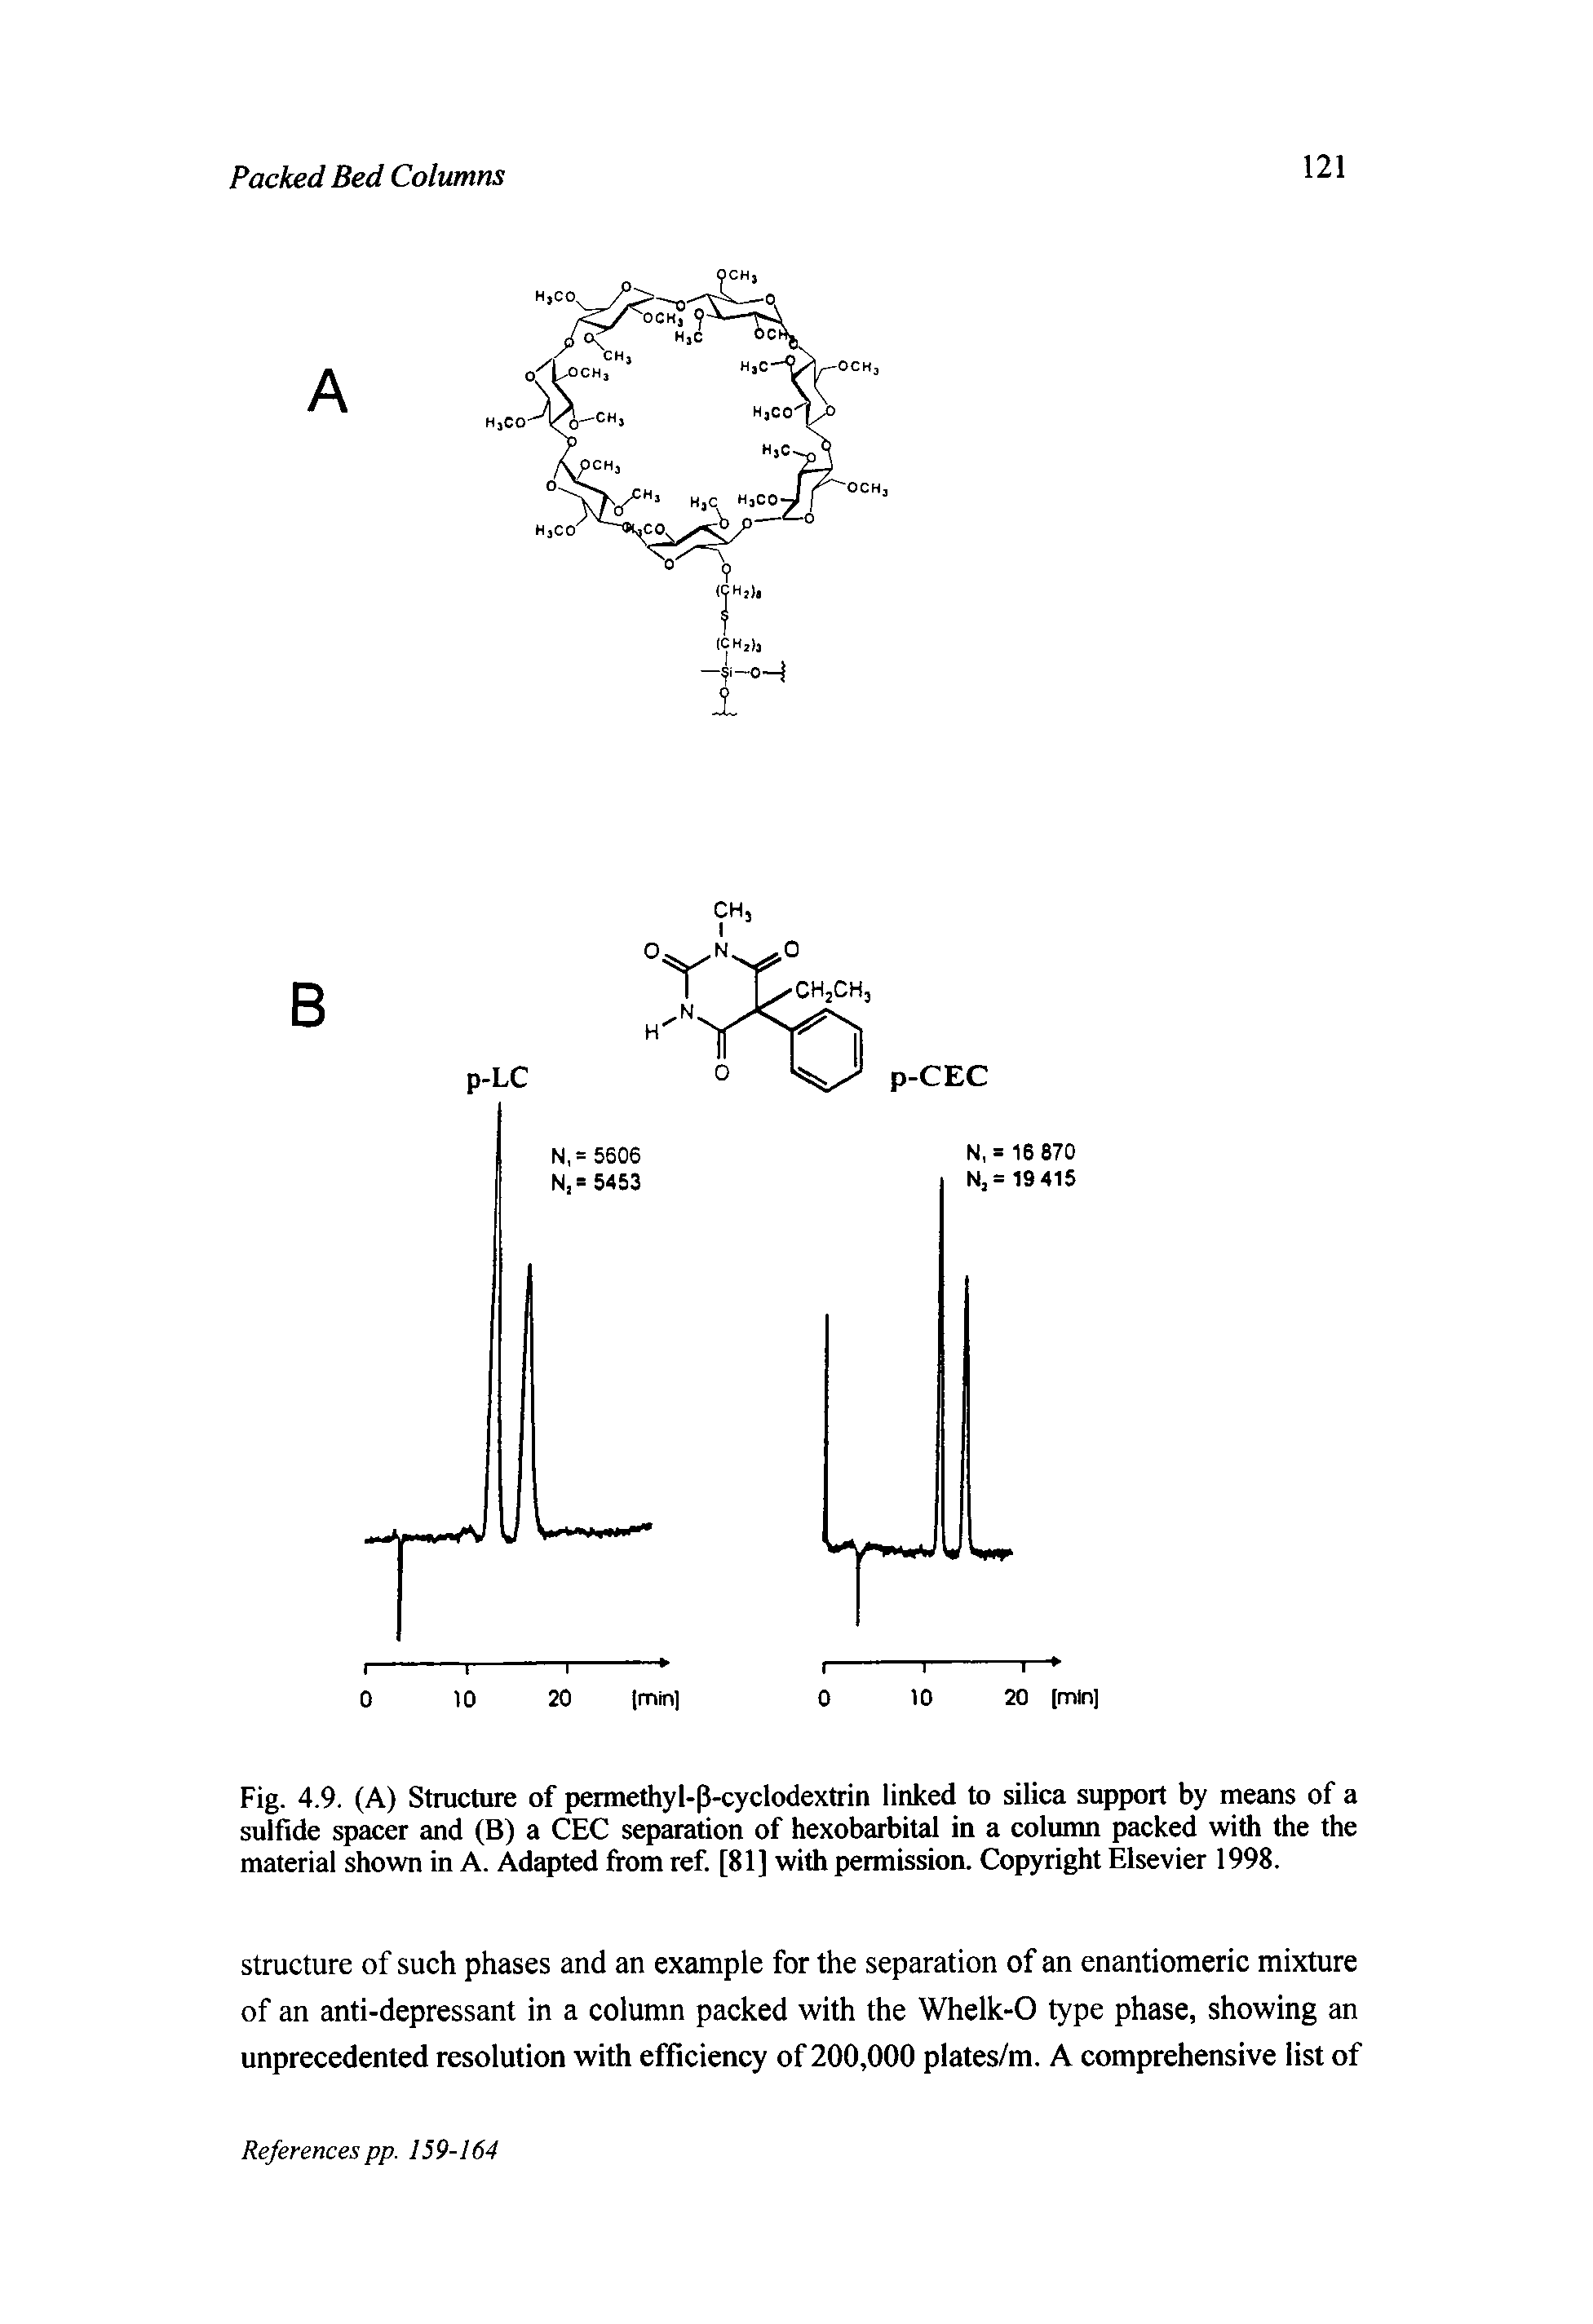 Fig. 4.9. (A) Structure of permethyl-p-cyclodextrin linked to silica support by means of a sulfide spacer and (B) a CEC separation of hexobarbital in a column packed with the the material shown in A. Adapted from ref. [81] with permission. Copyright Elsevier 1998.